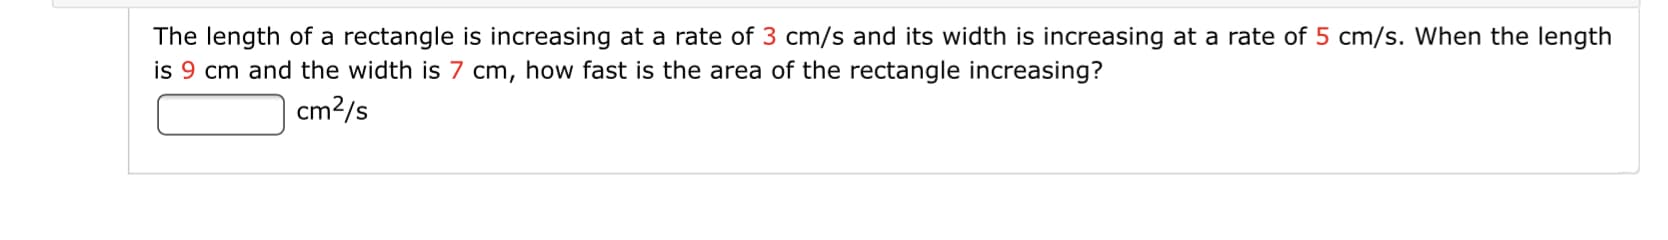 The length of a rectangle is increasing at a rate of 3 cm/s and its width is increasing at a rate of 5 cm/s. When the length
is 9 cm and the width is 7 cm, how fast is the area of the rectangle increasing?
cm?/s
